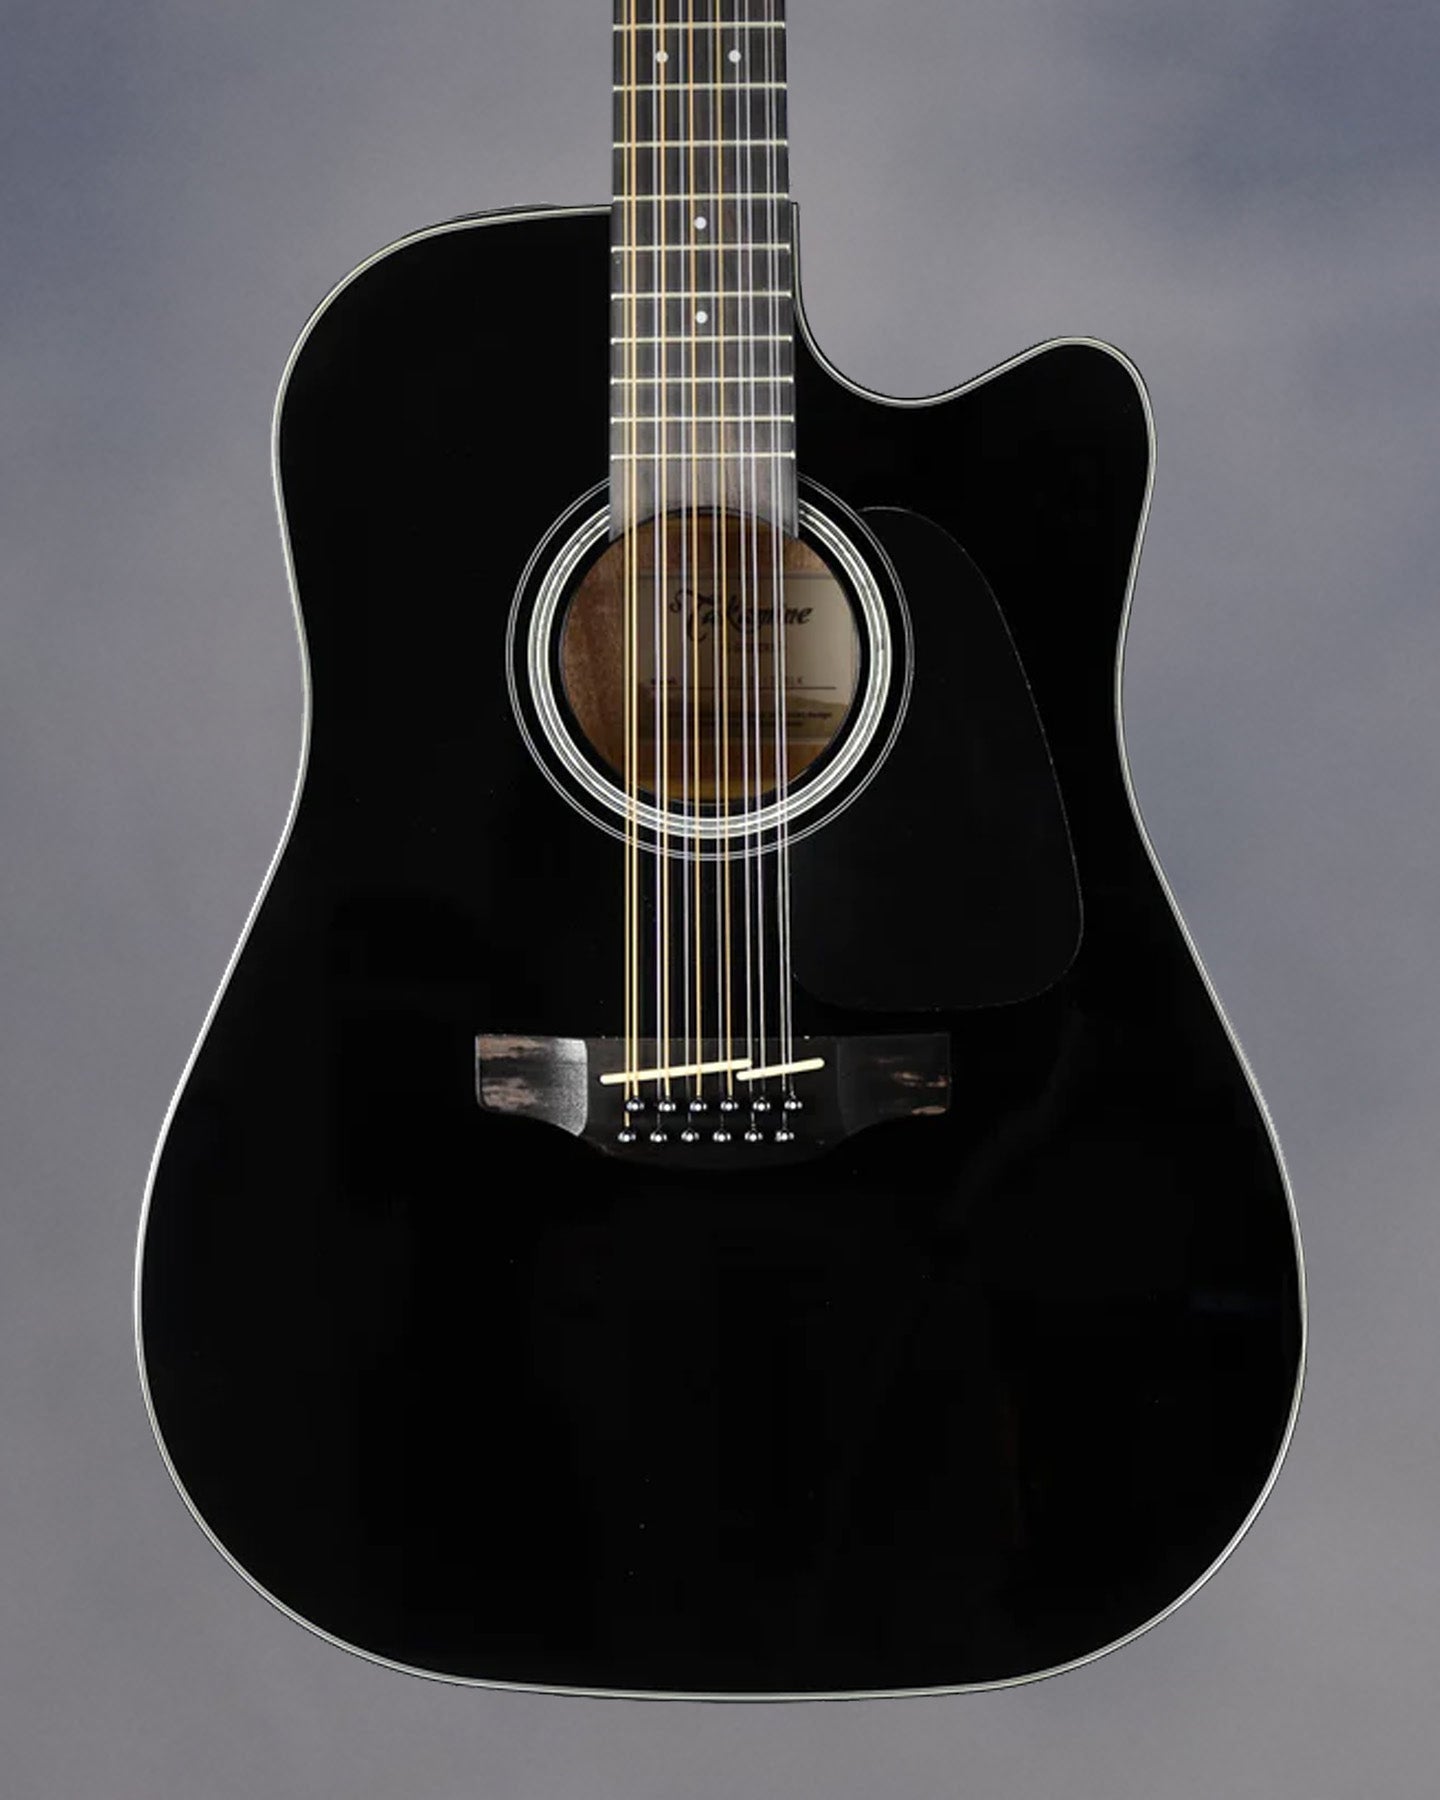 12-String Dreadnought with cutaway, solid spruce top, sapele back and sides, black finish, chrome